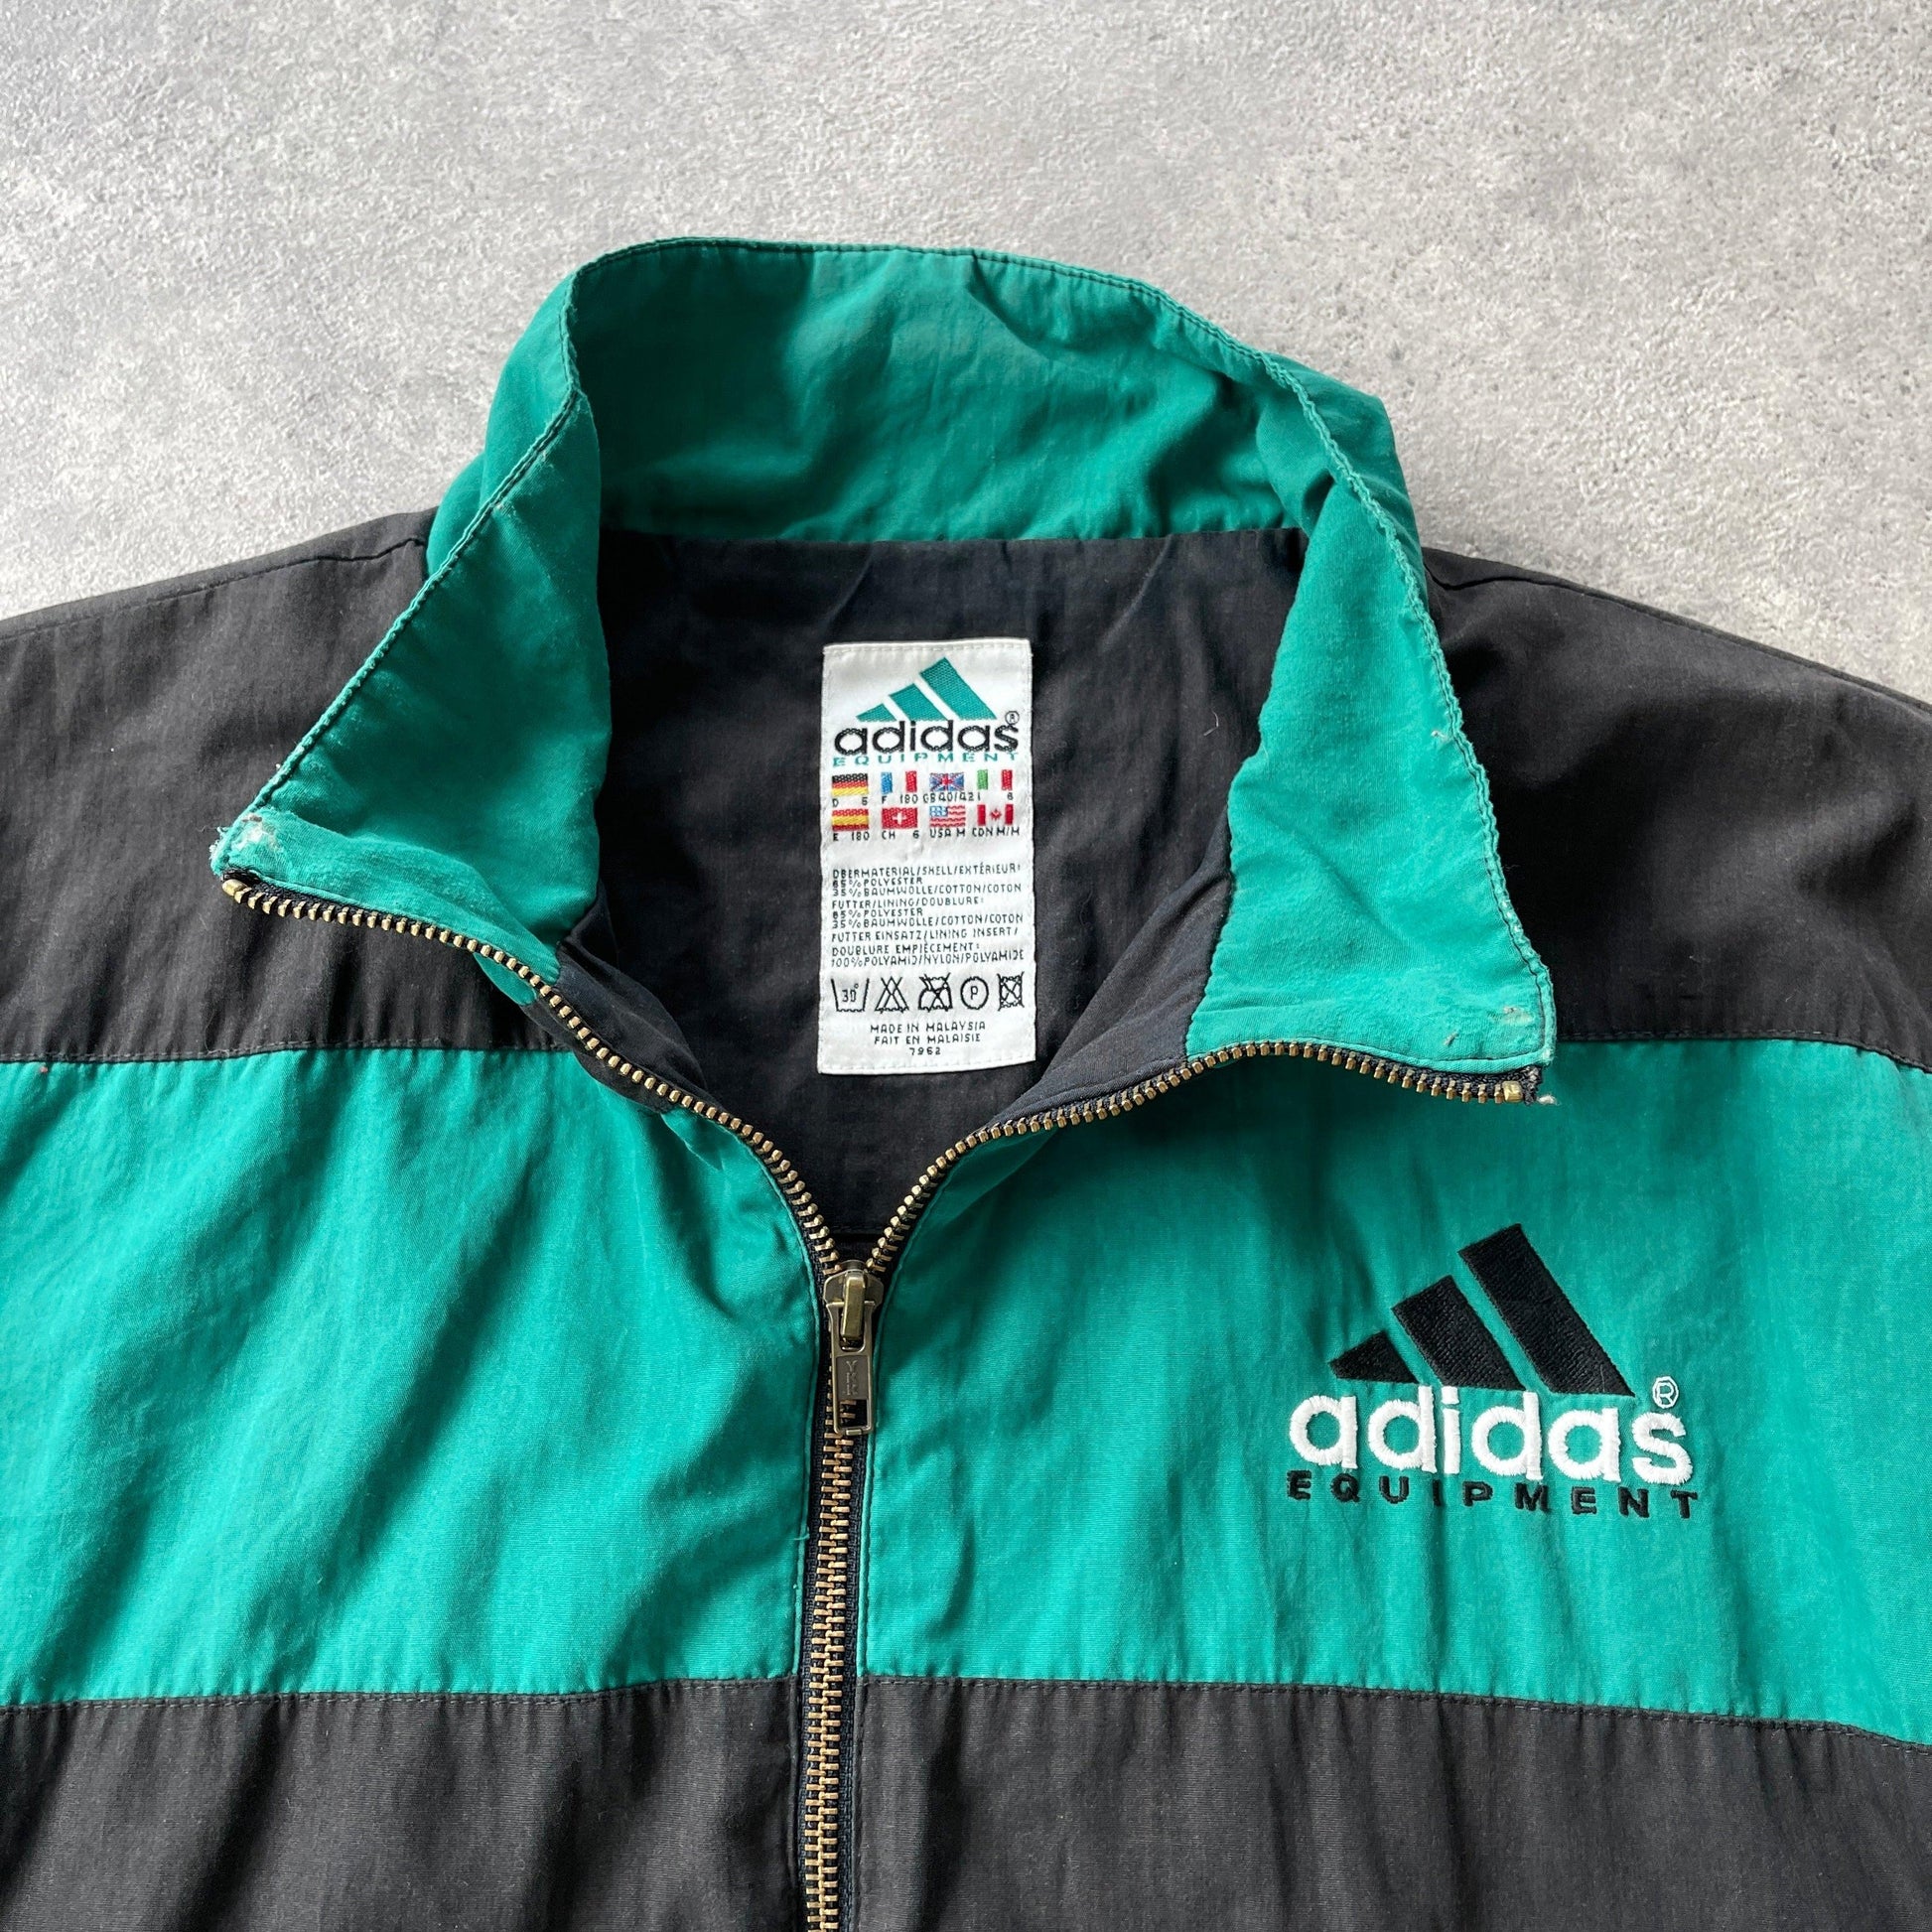 Adidas Equipment 1990s lightweight embroidered track jacket (M) - Known Source